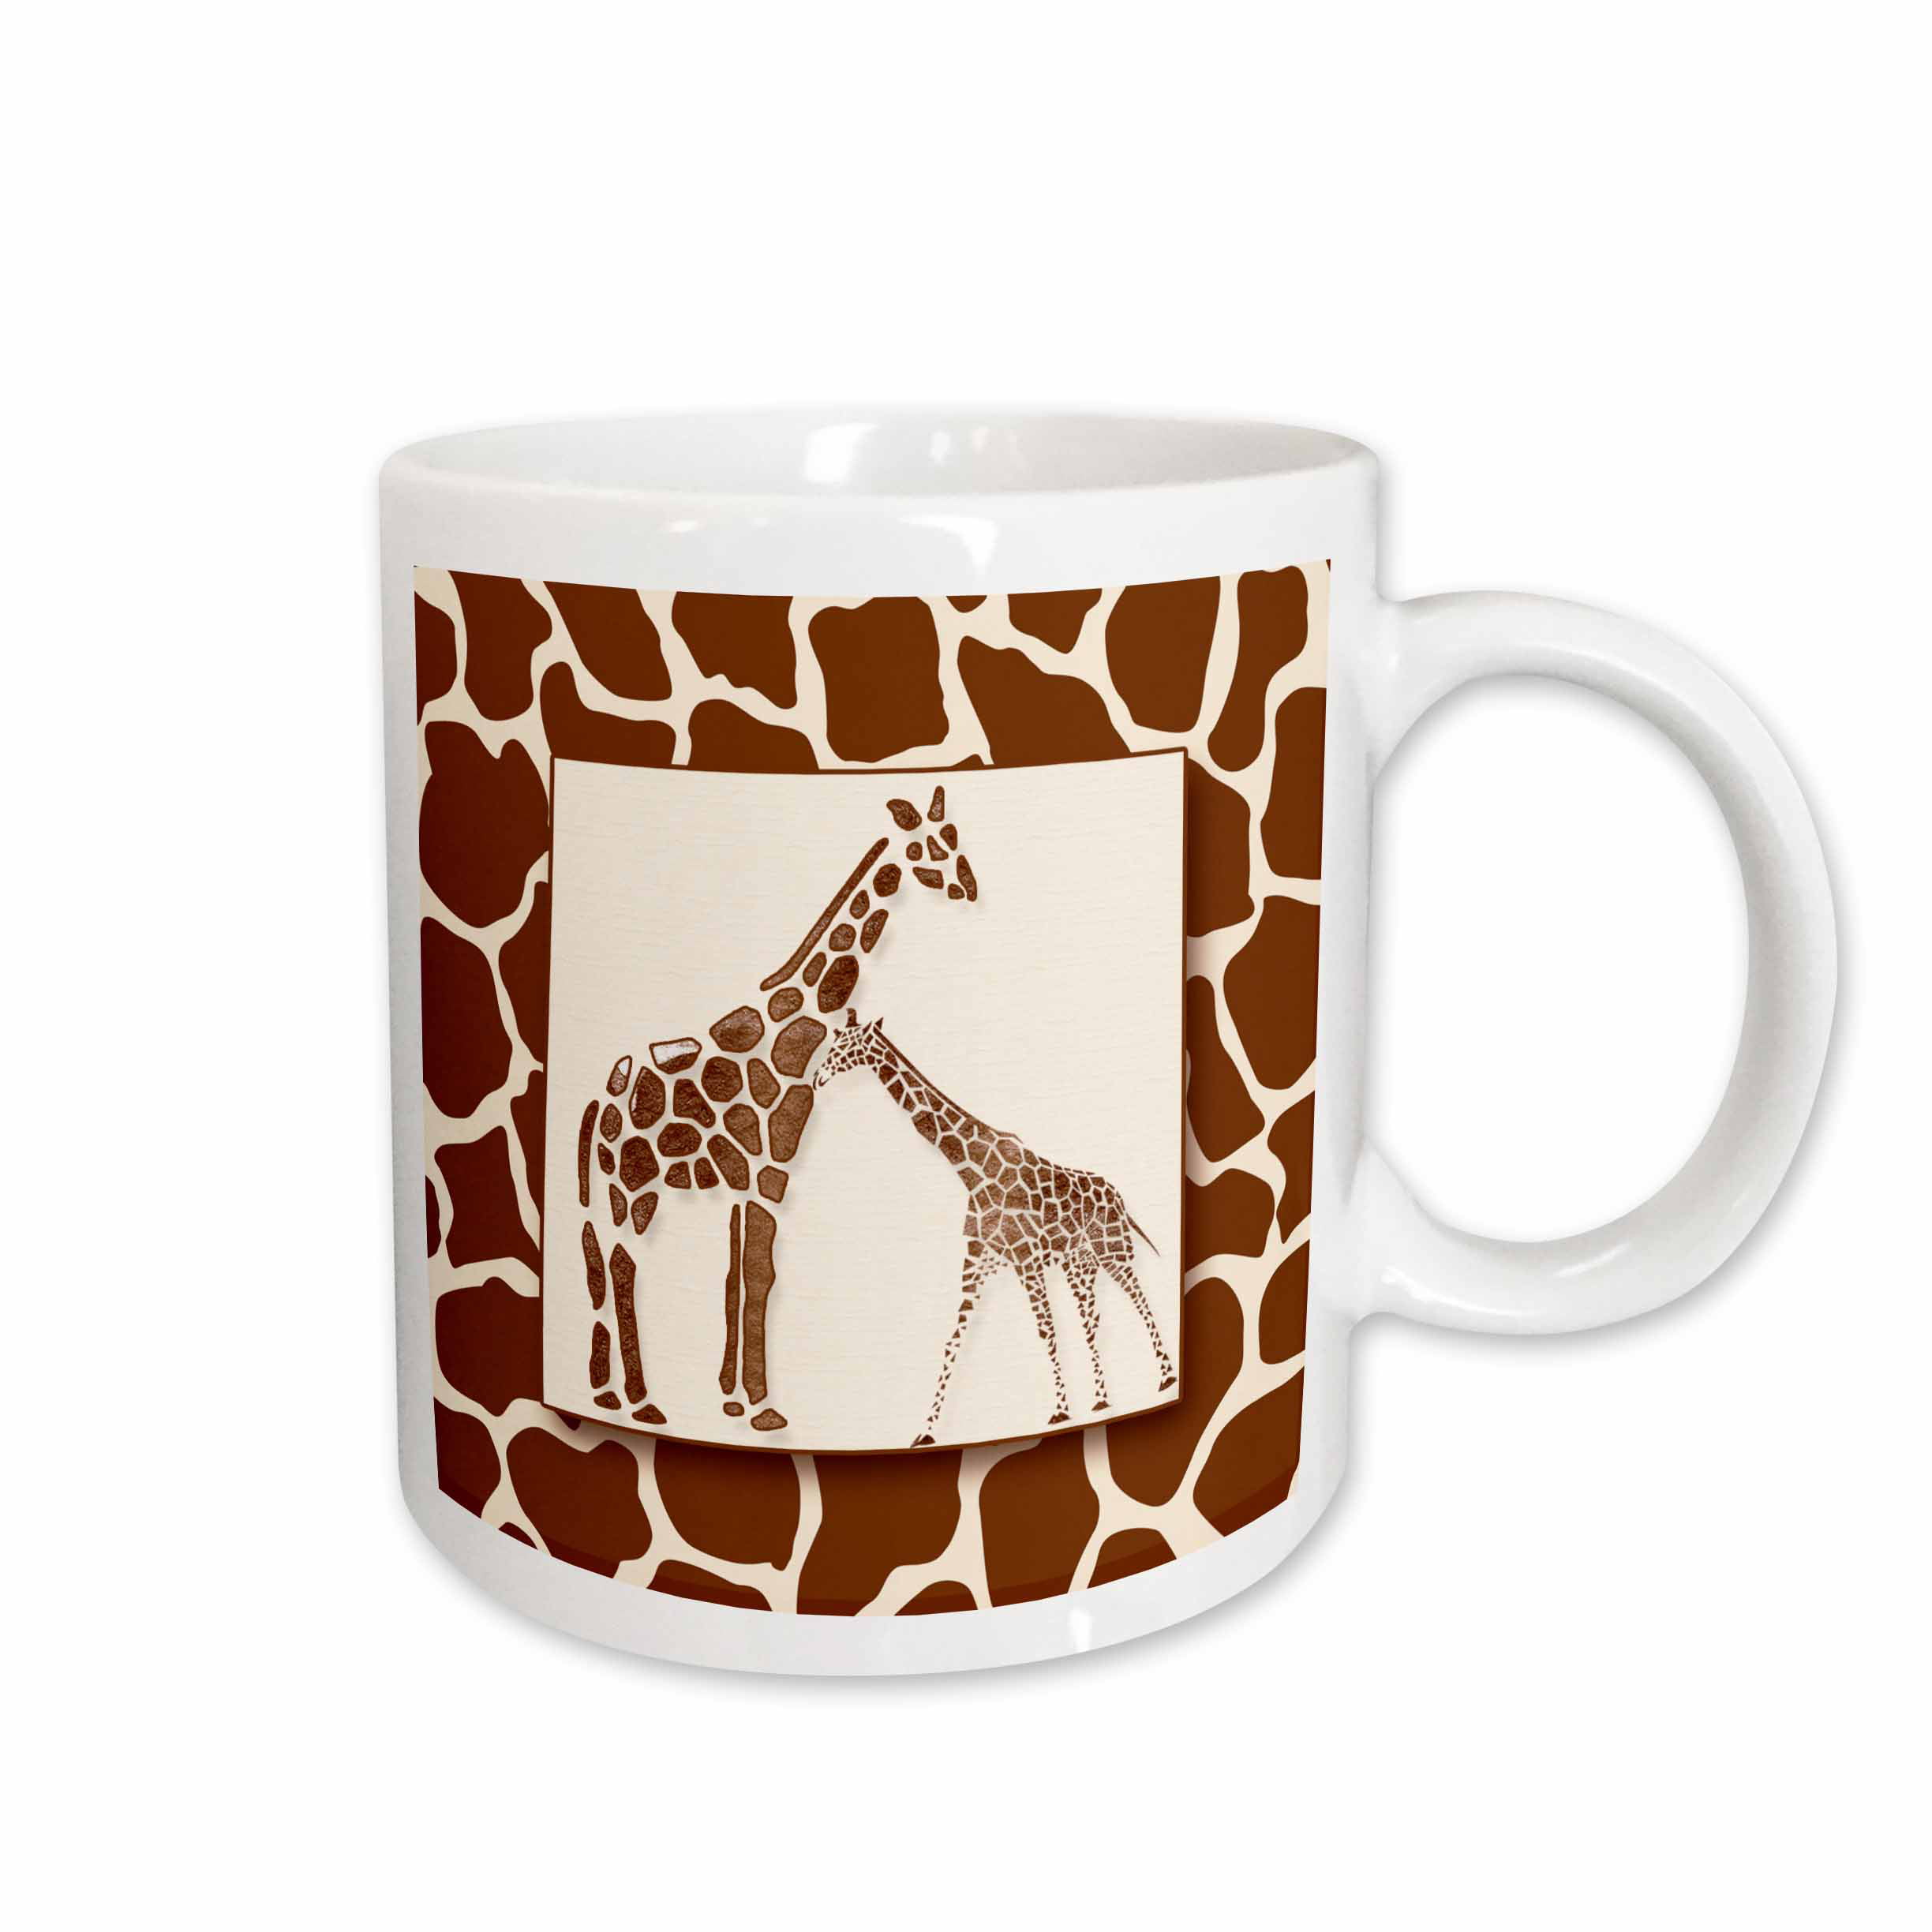 White Ceramic Coffee Tea Mug is part of Old Tortuga's Sweet Life Collection offered through Mugs4YourSoul Africa Safari 15 oz